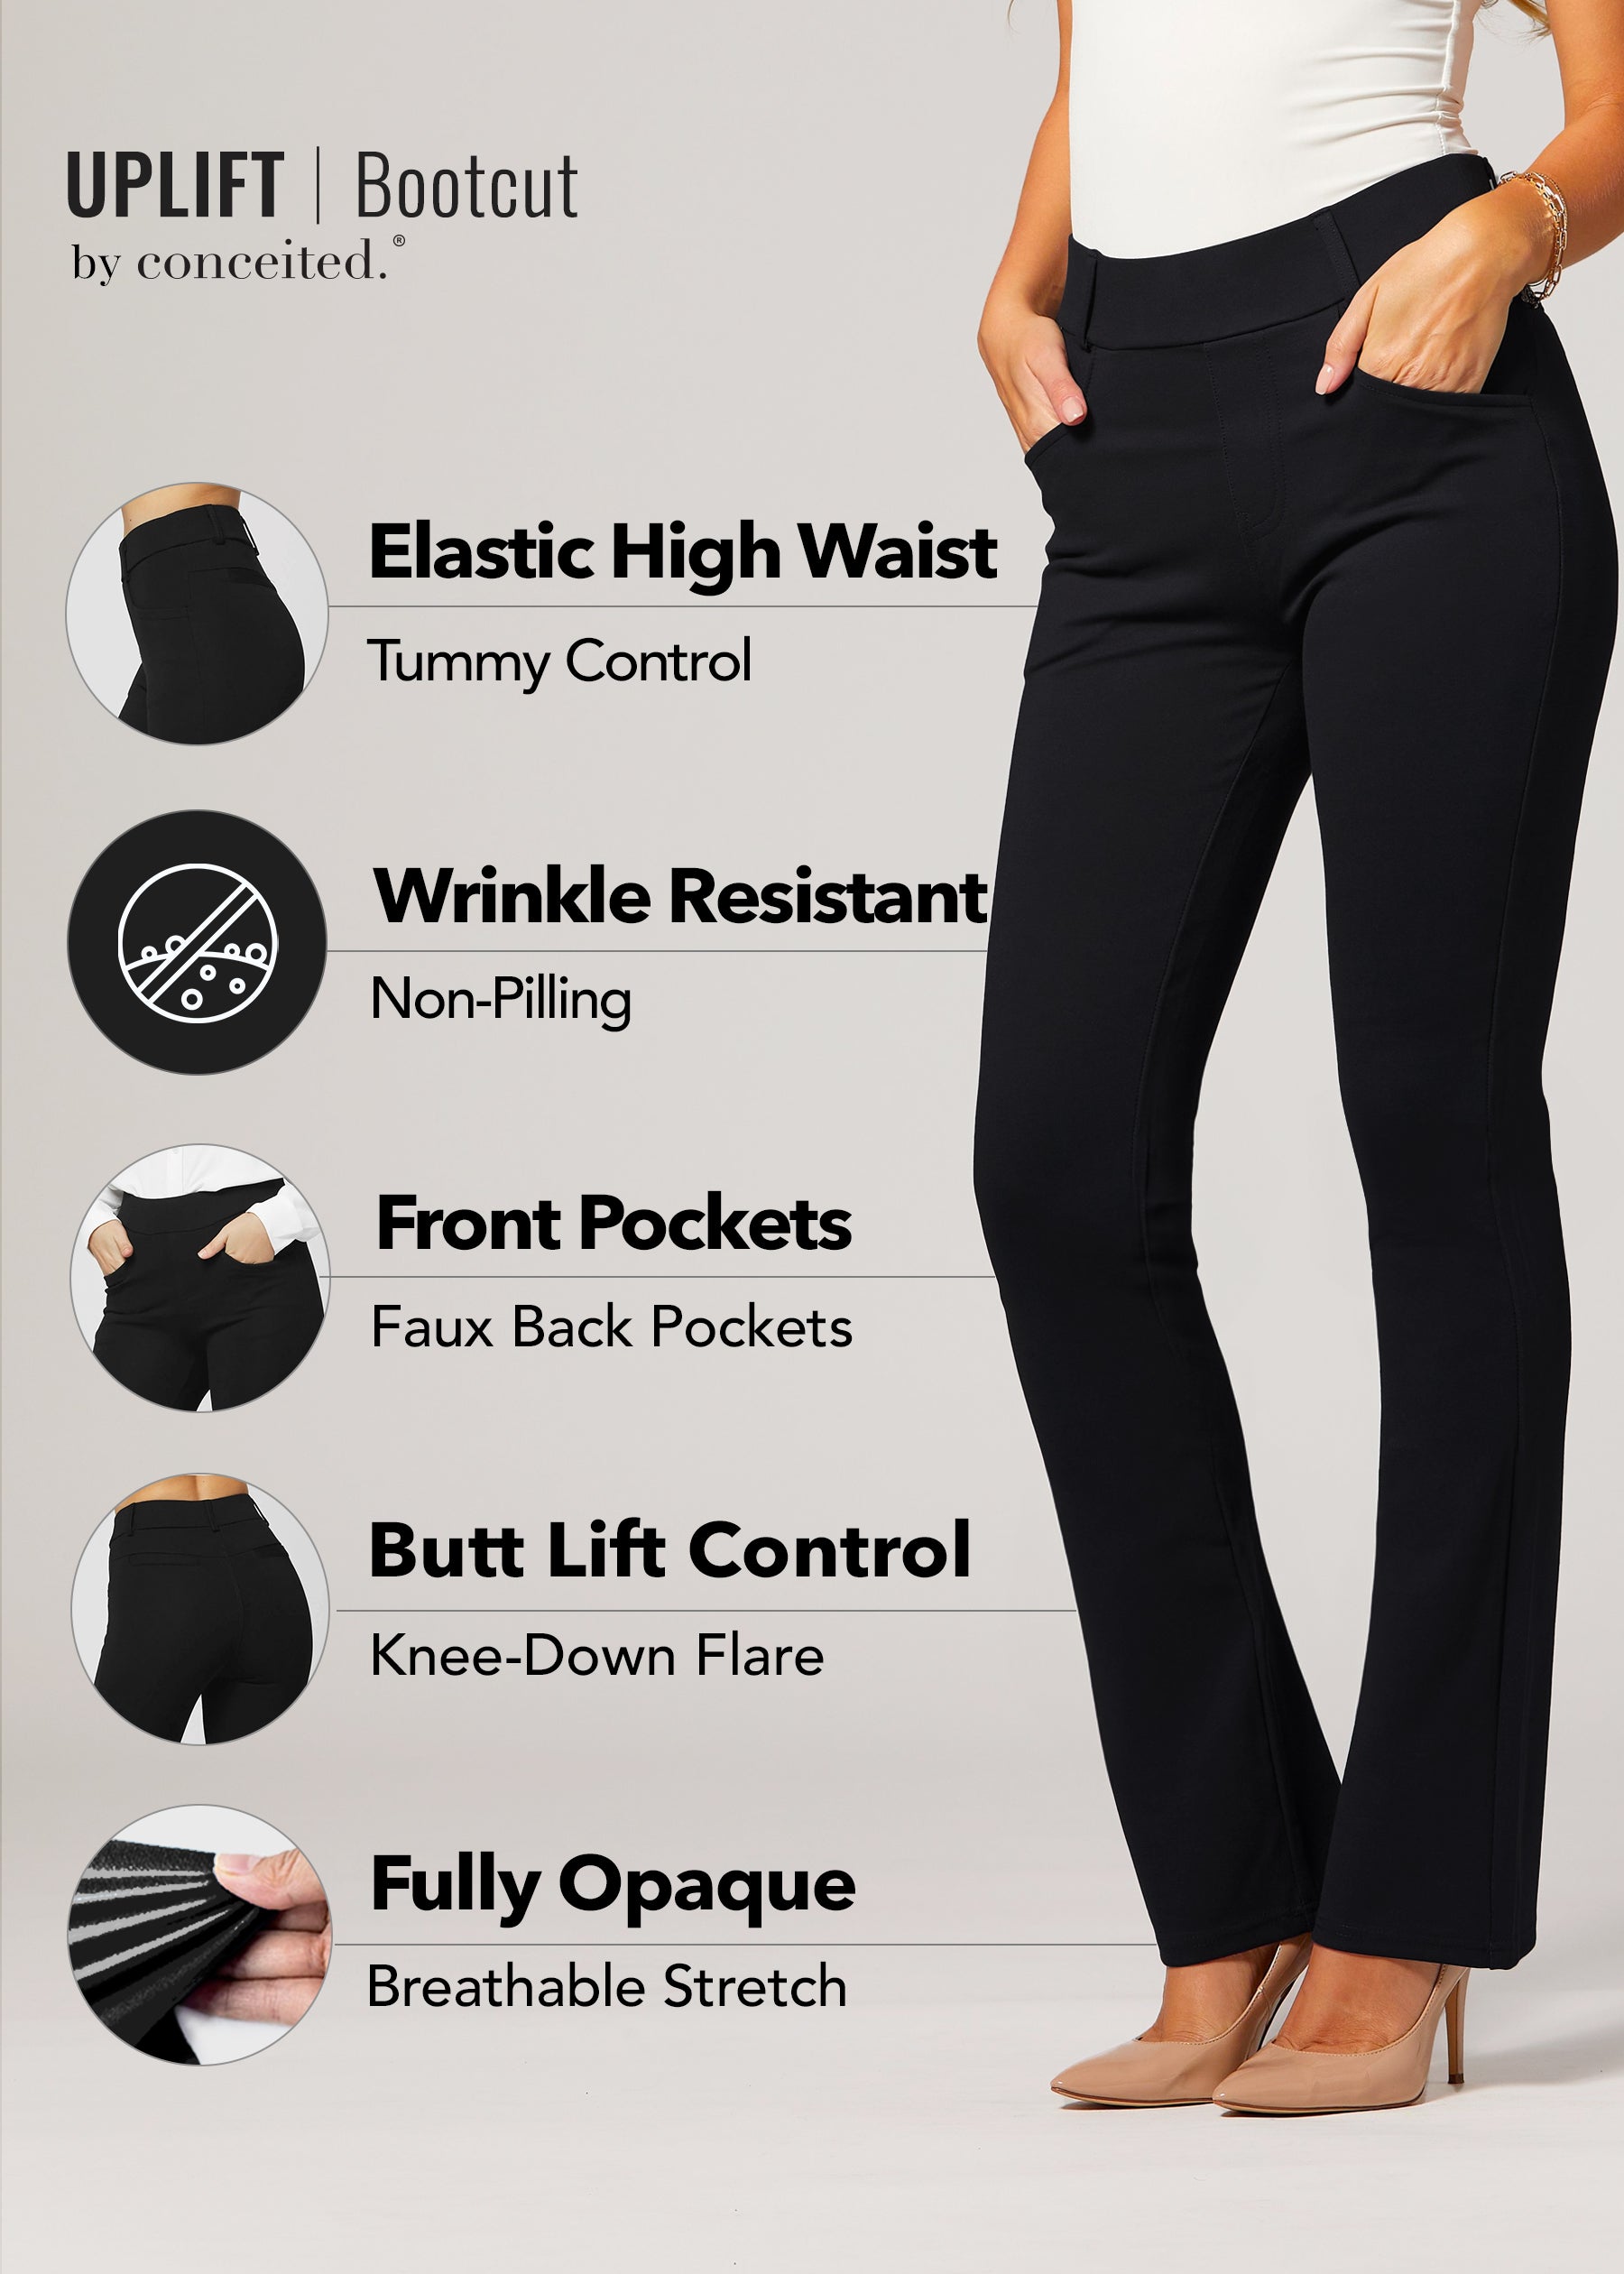 Conceited Premium Women's Stretch Dress Pants - Wear to Work - Ponte  Treggings - Slim Leg with Buttons - Black 